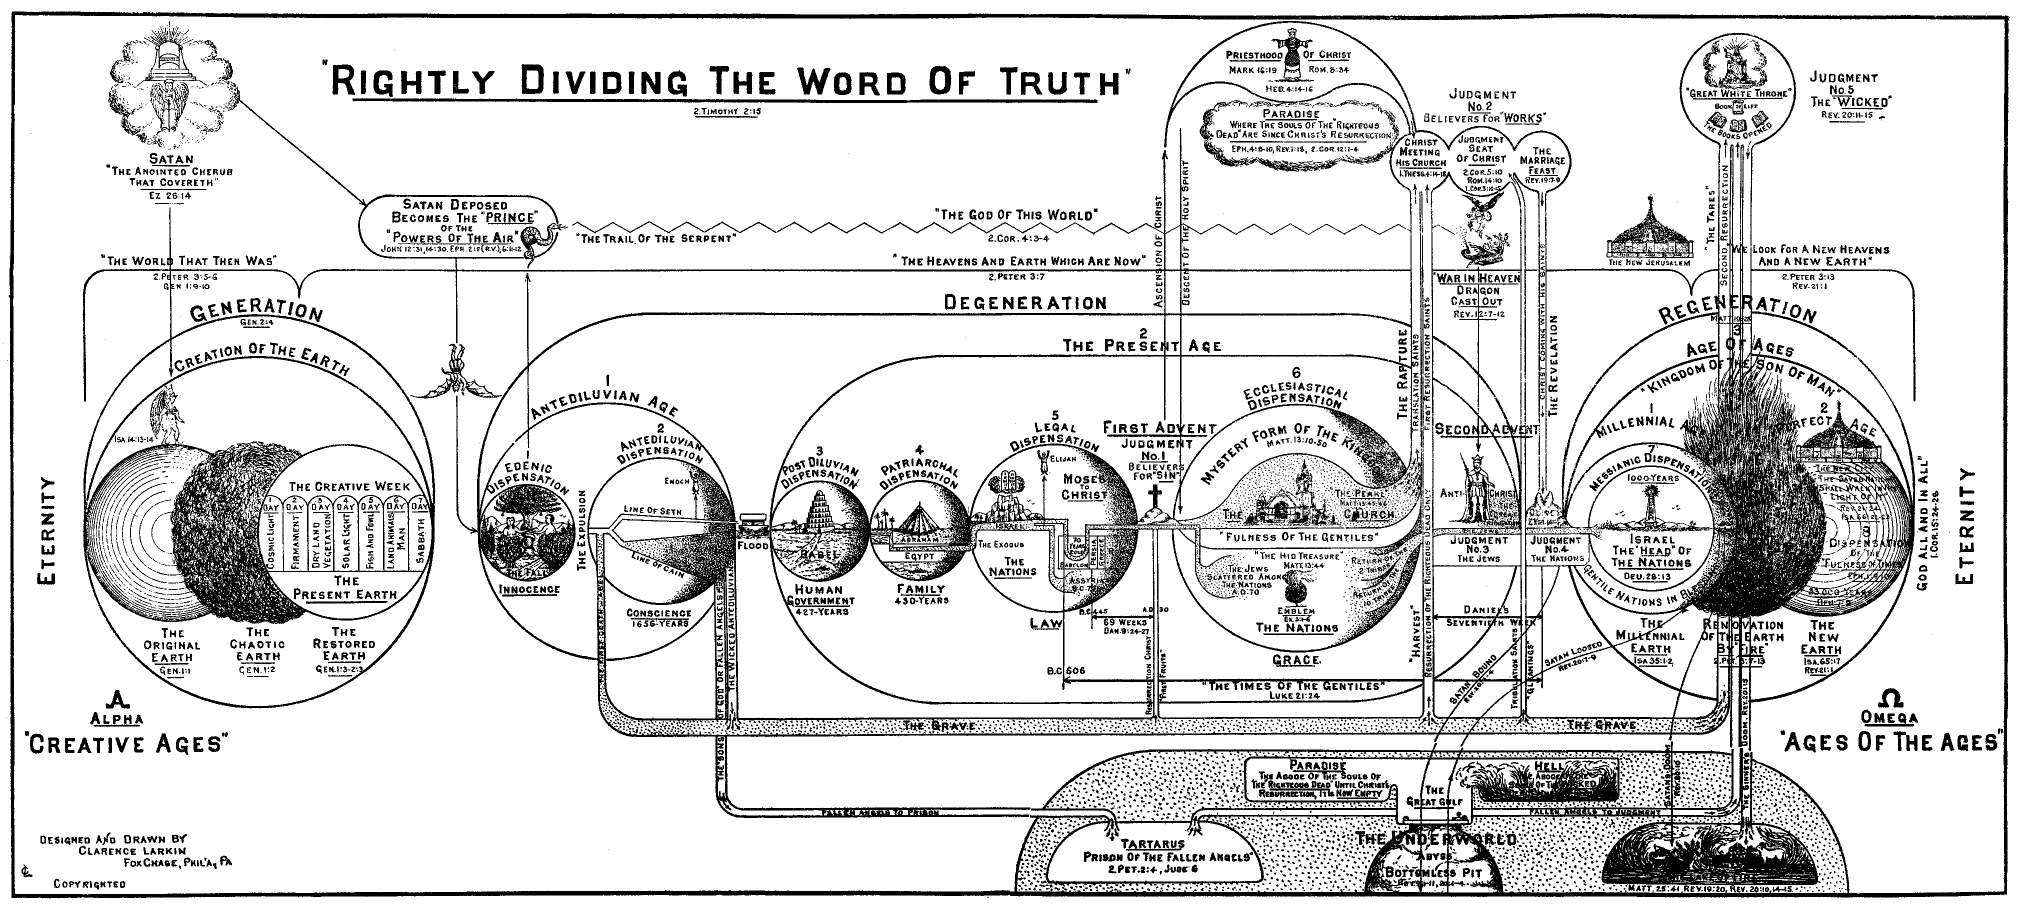 Rightly Dividing the Word of Truth by Clarence Larkin, 1920